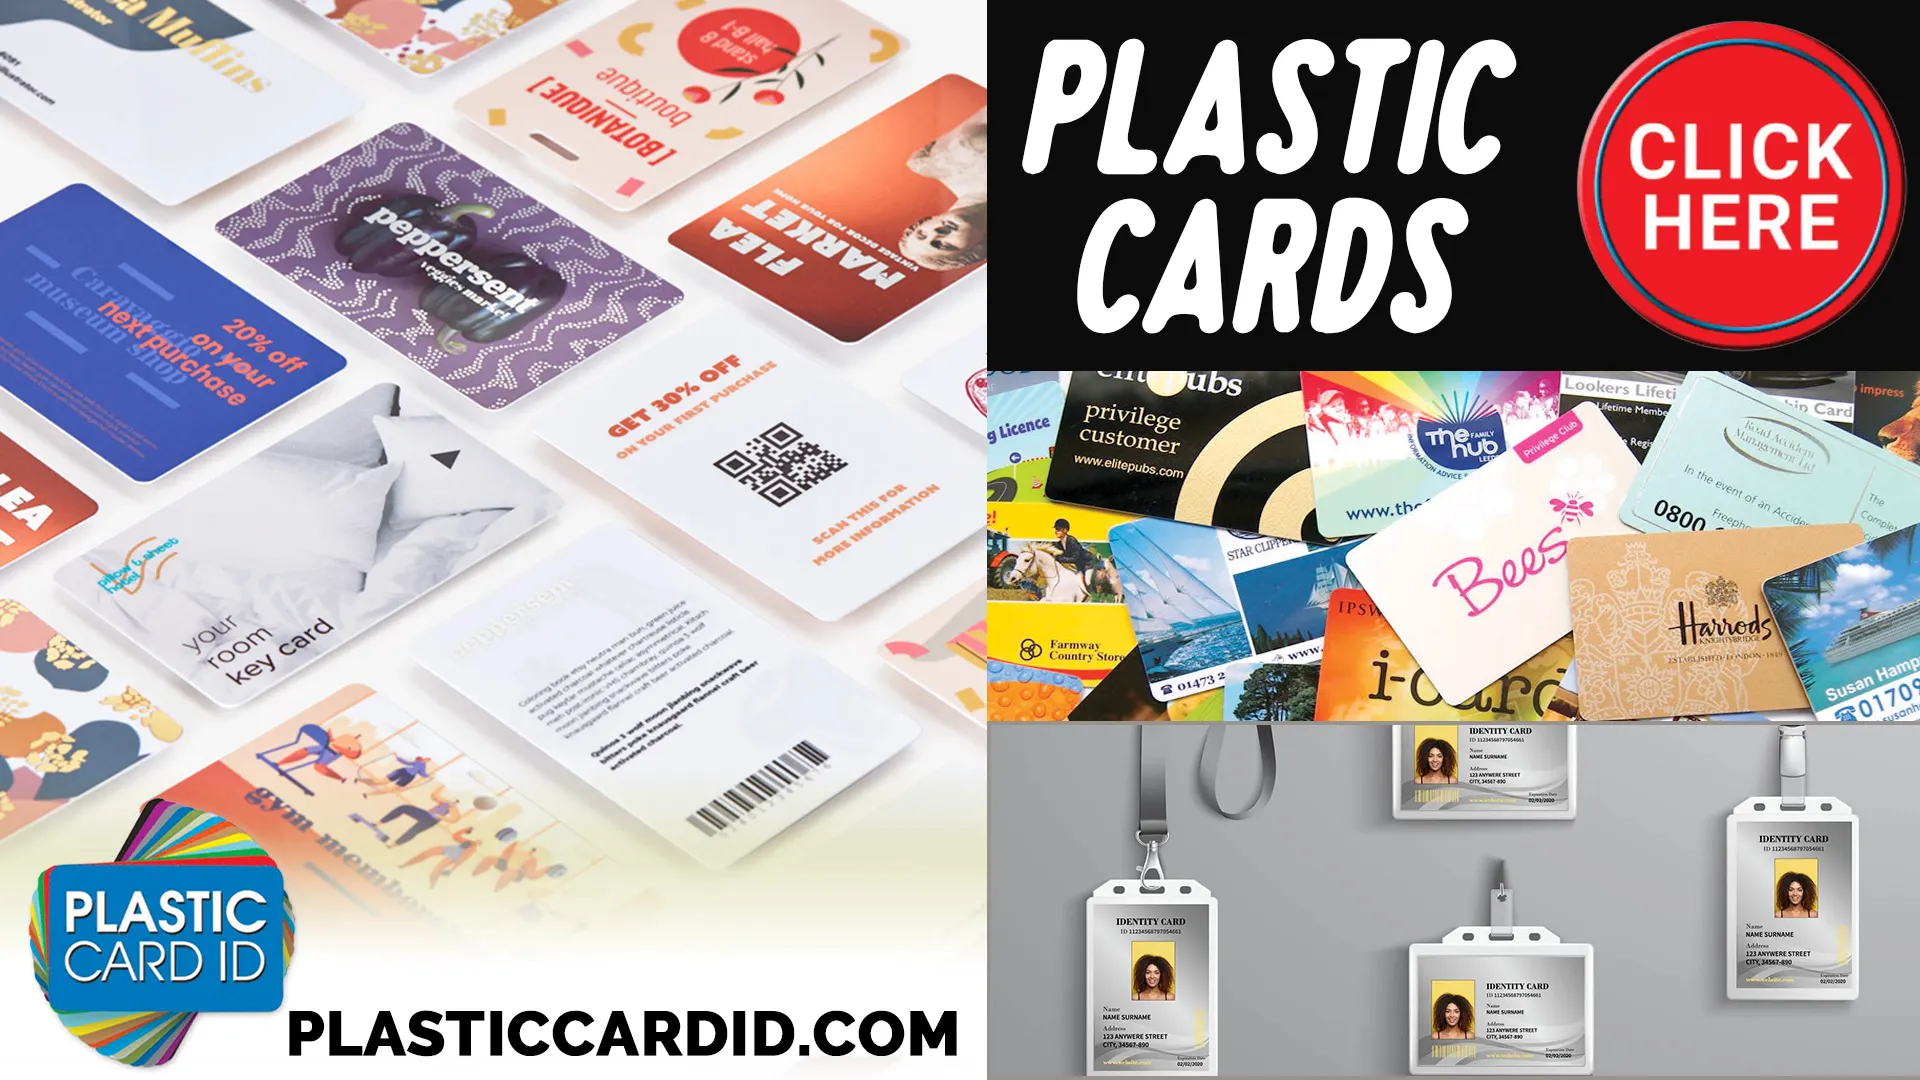 Welcome to Plastic Card ID




: Your Gateway to Global Brand Recognition